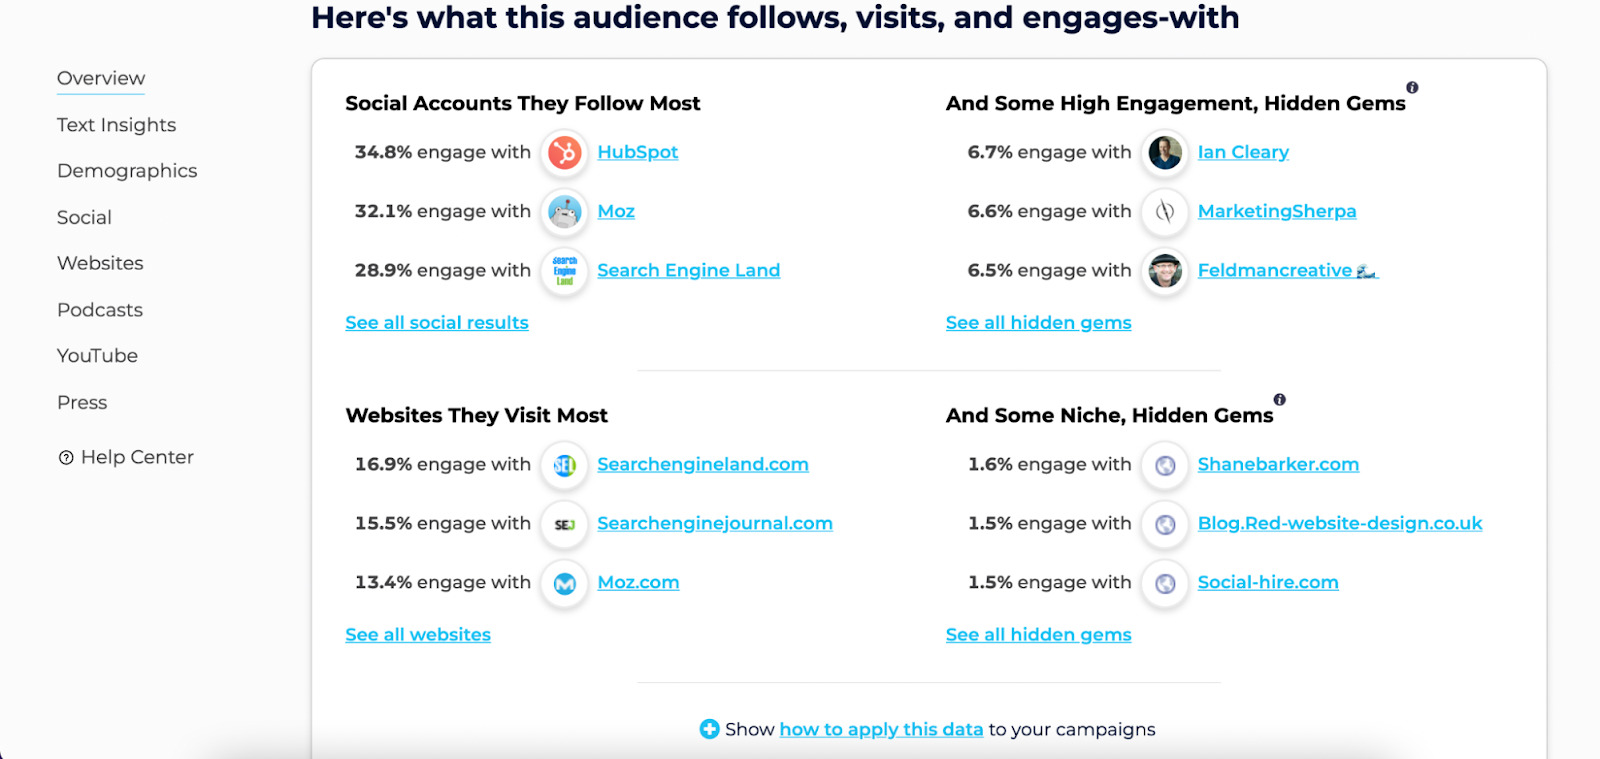 Engagement data about an audience